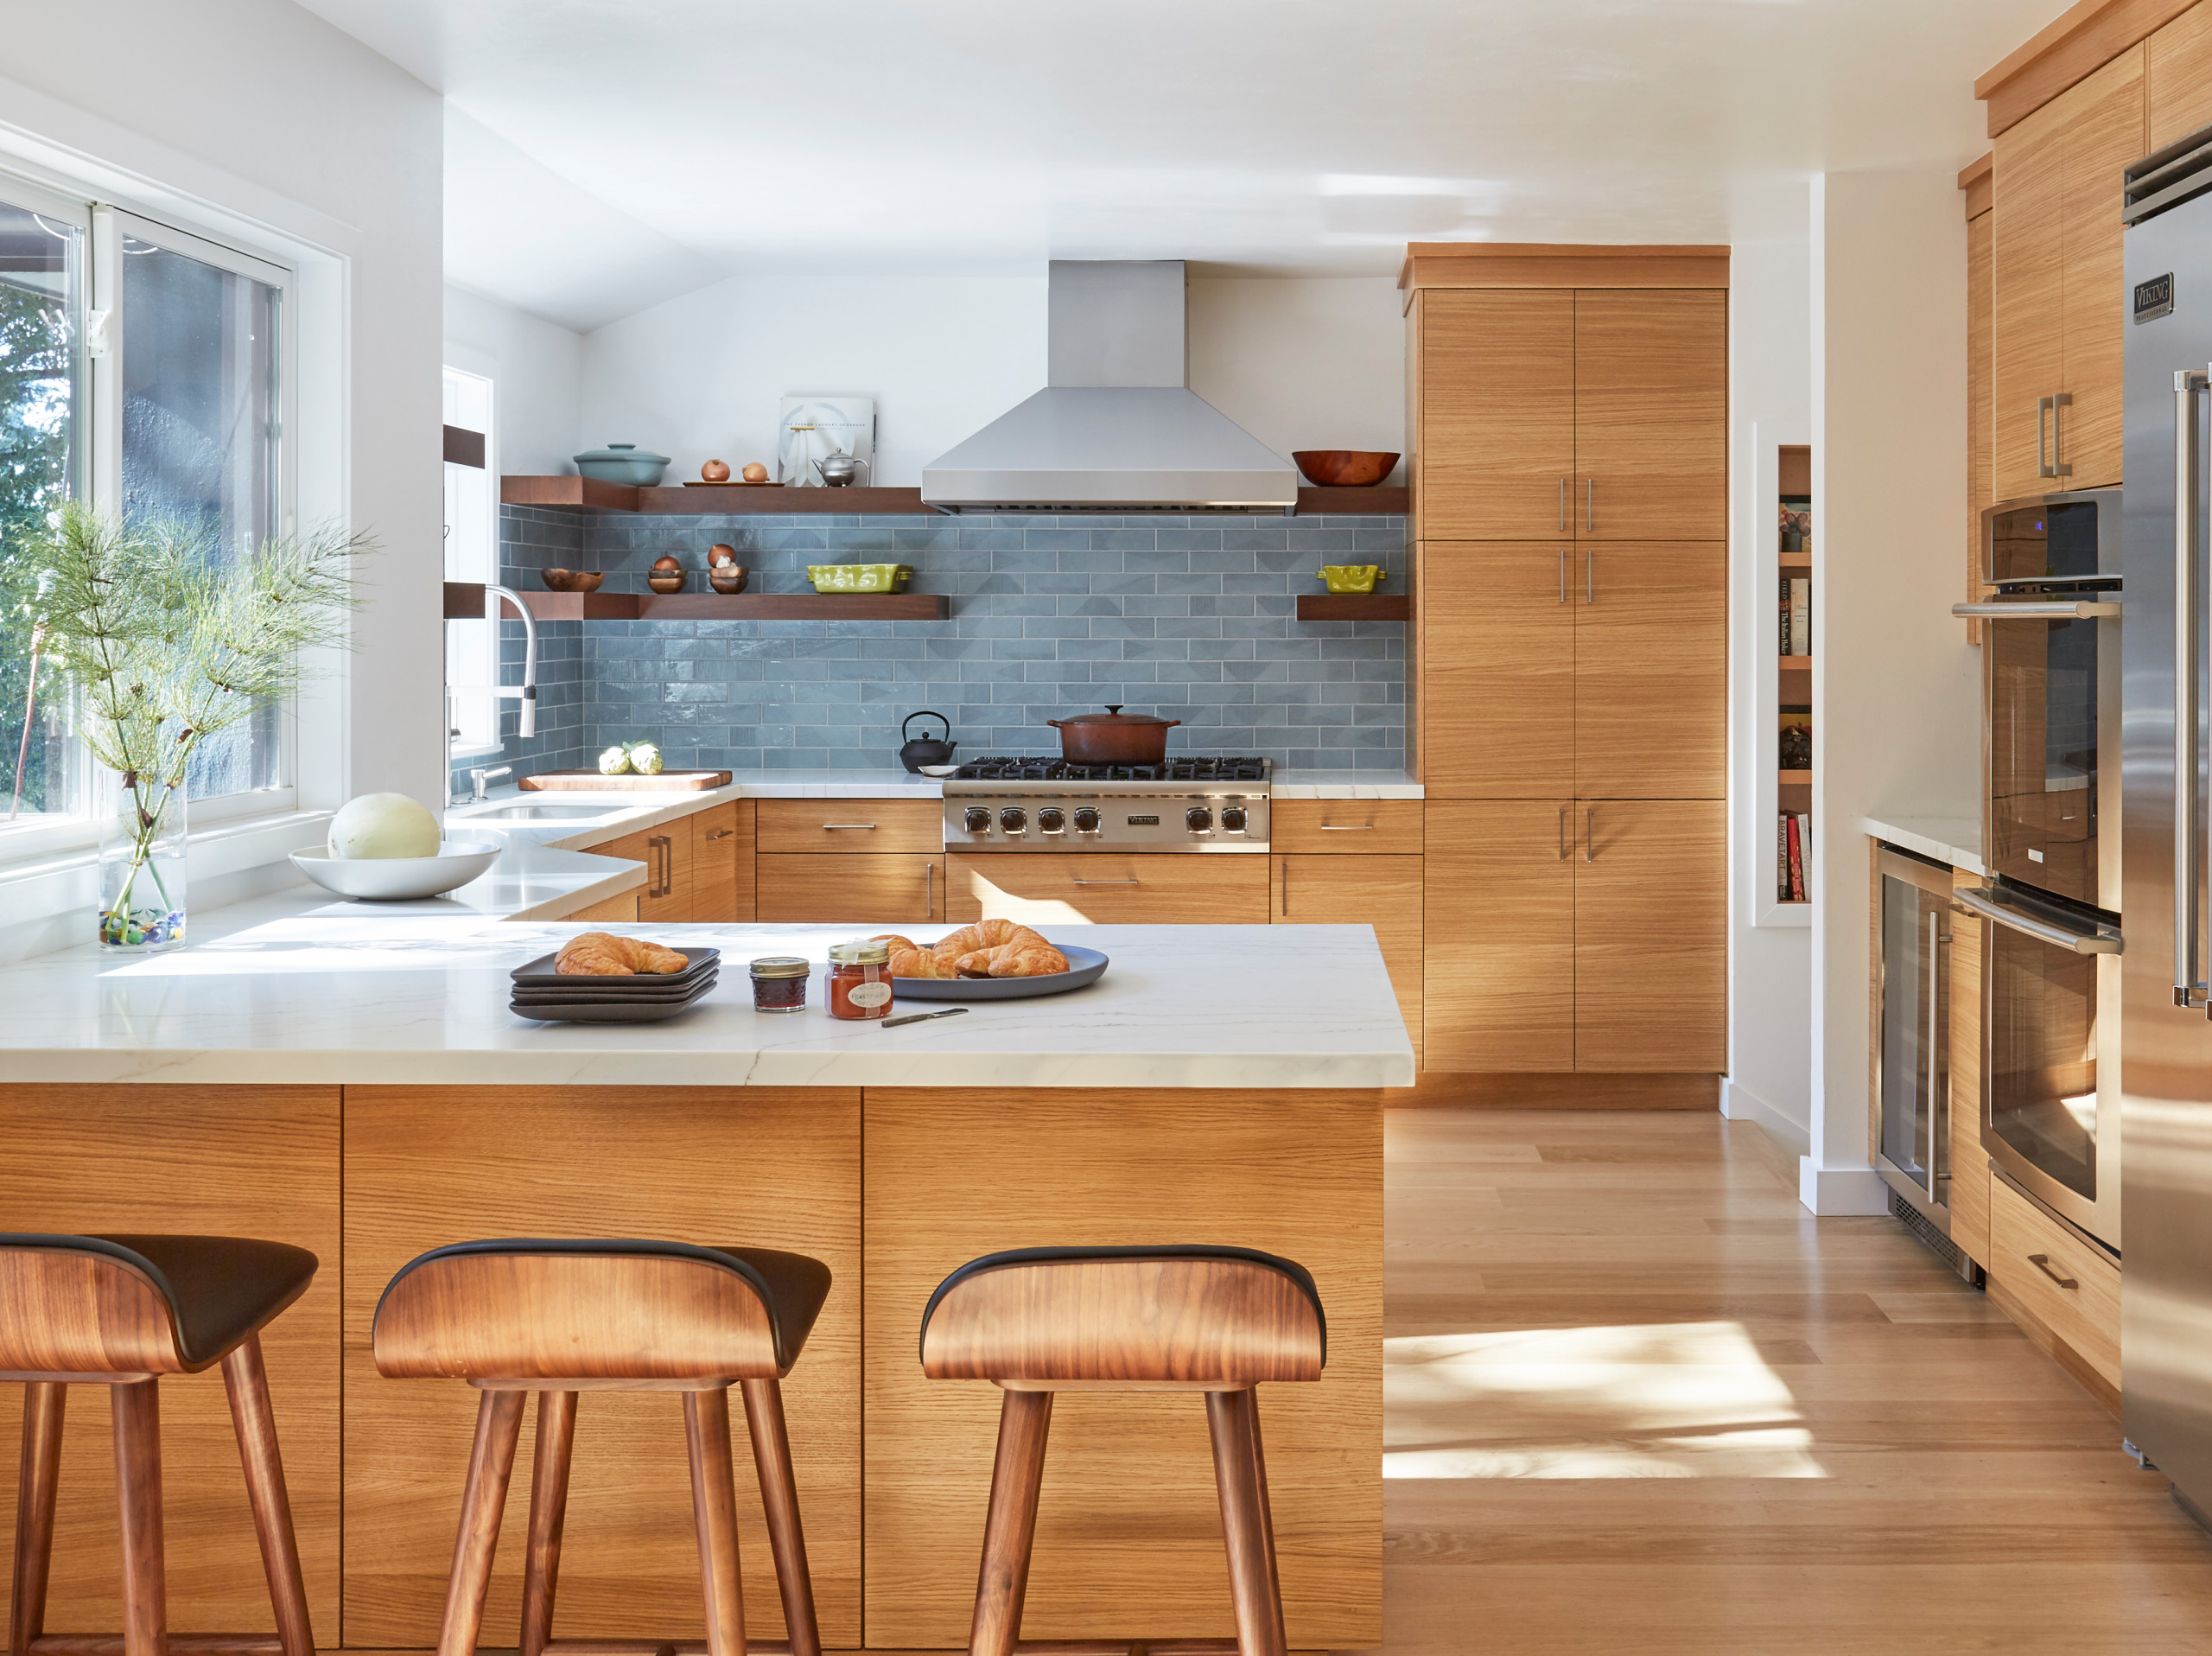 18 Beautiful Contemporary Kitchen Pictures & Ideas   Houzz